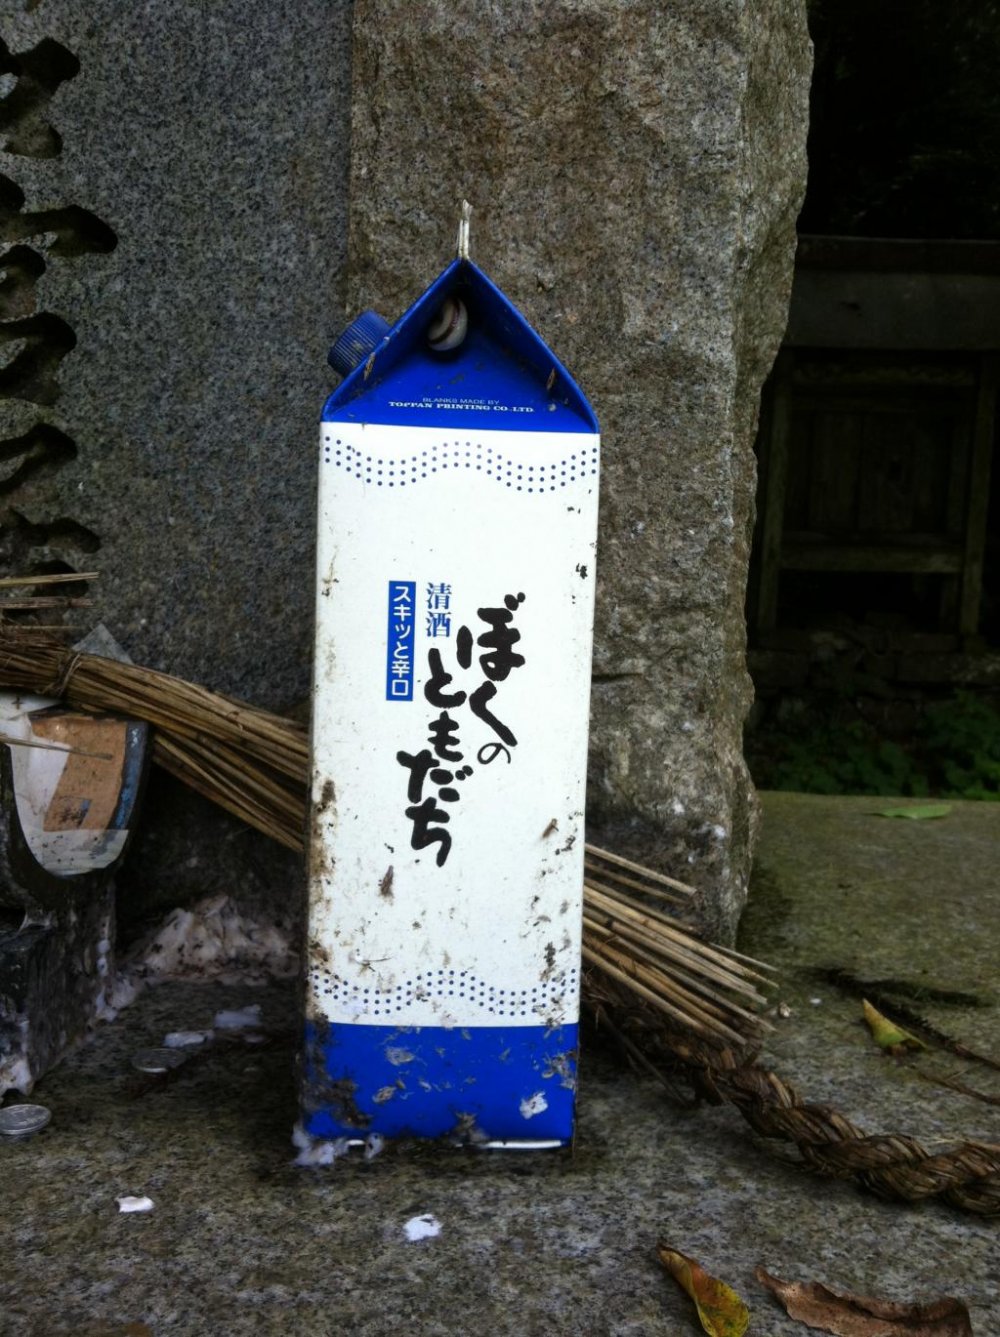 An offering of sake to the Gods